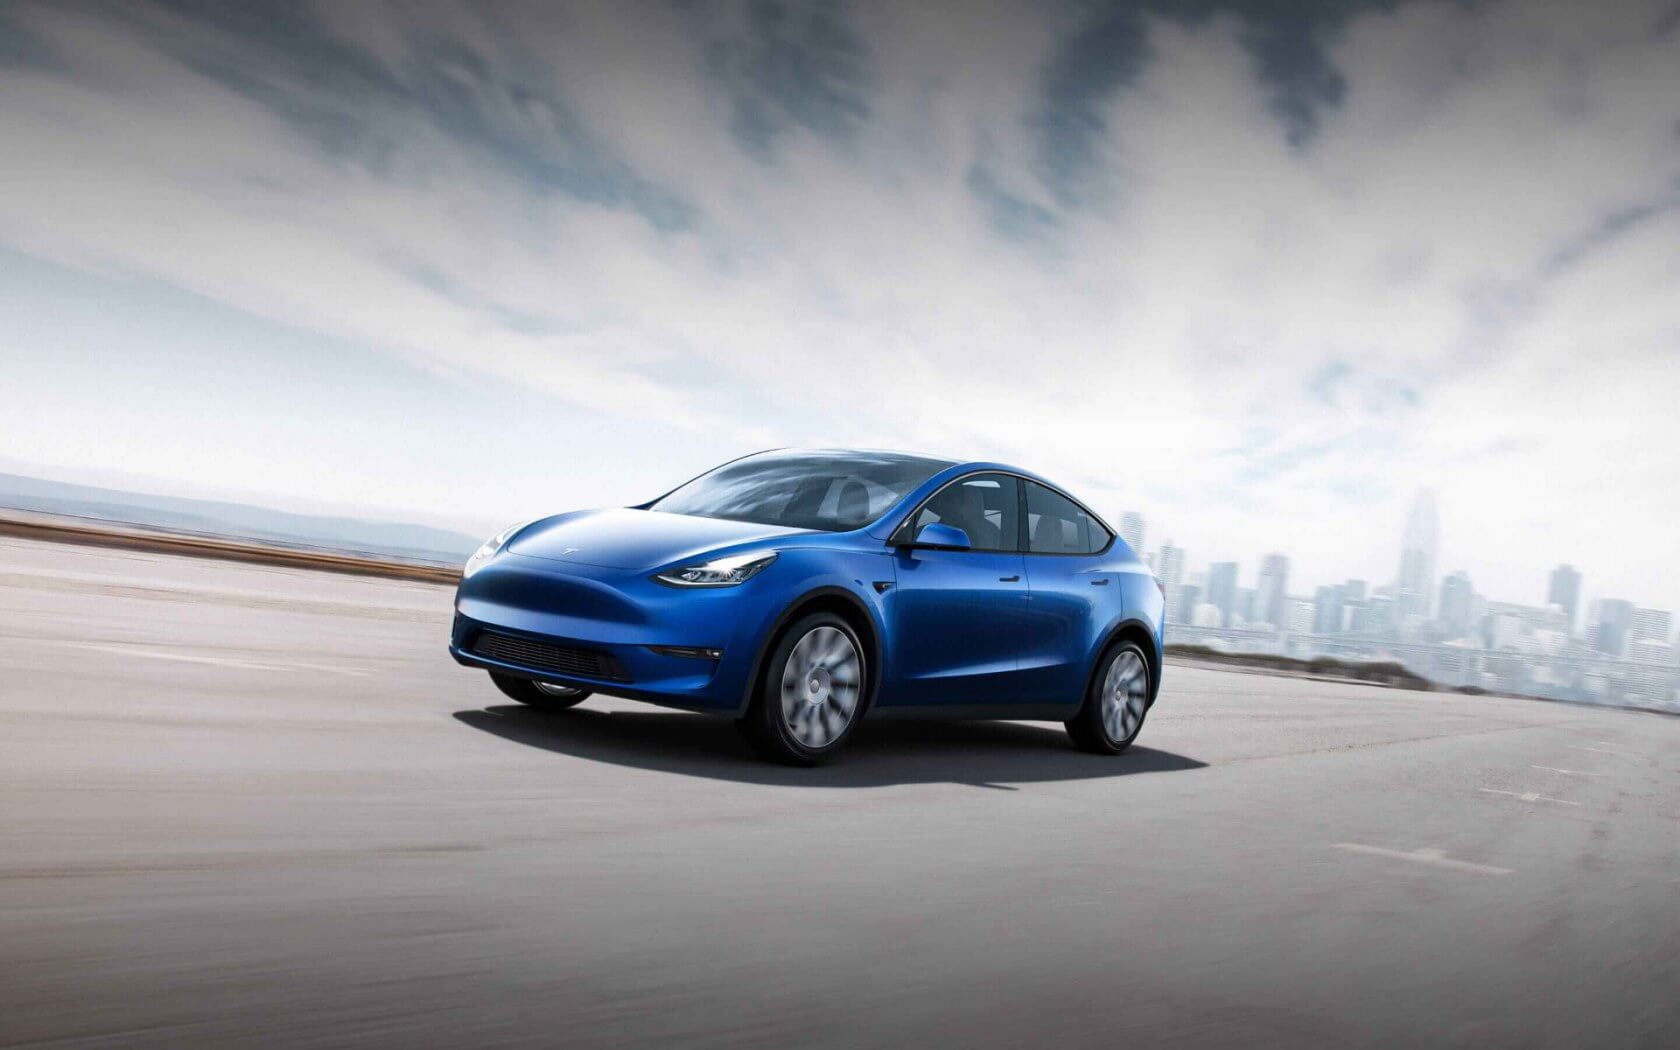 Tesla Model Y crossover is now in production, shipping in March